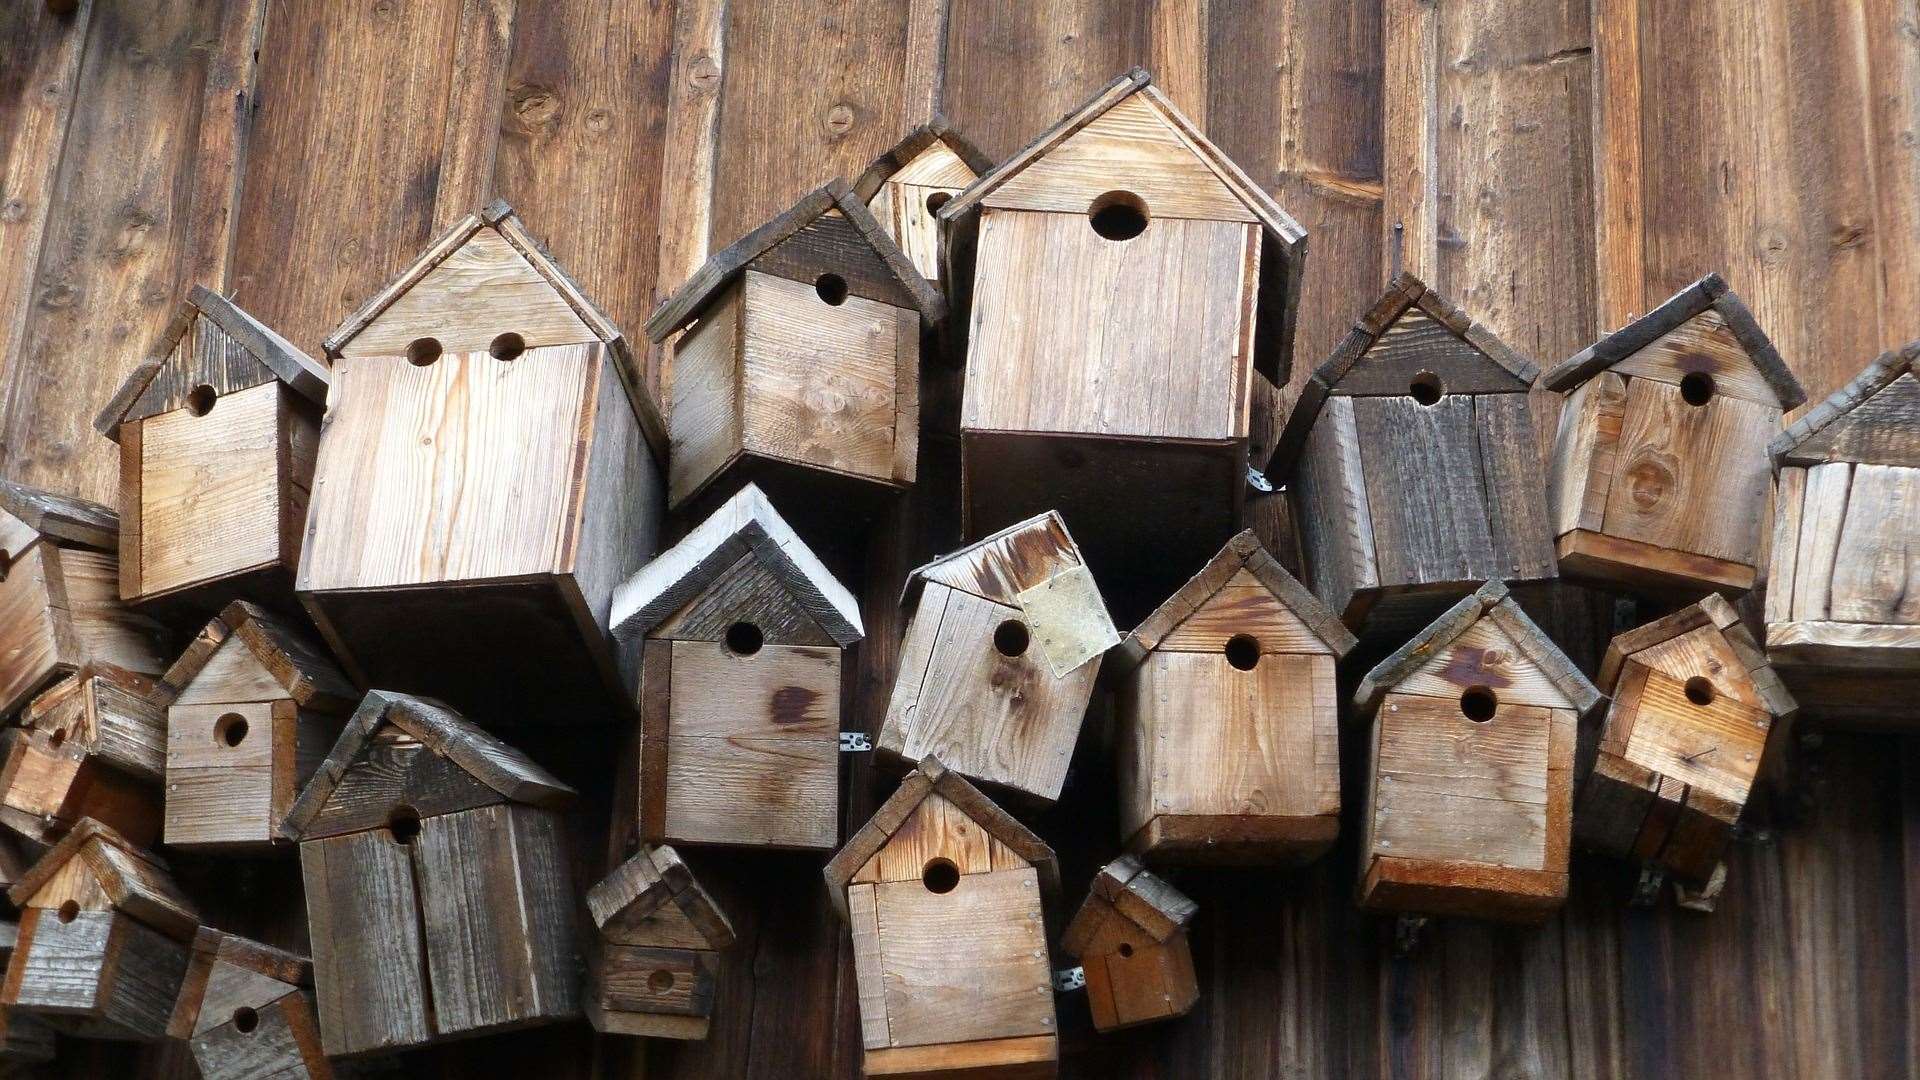 Make a nestbox to help the birds settle back in the UK